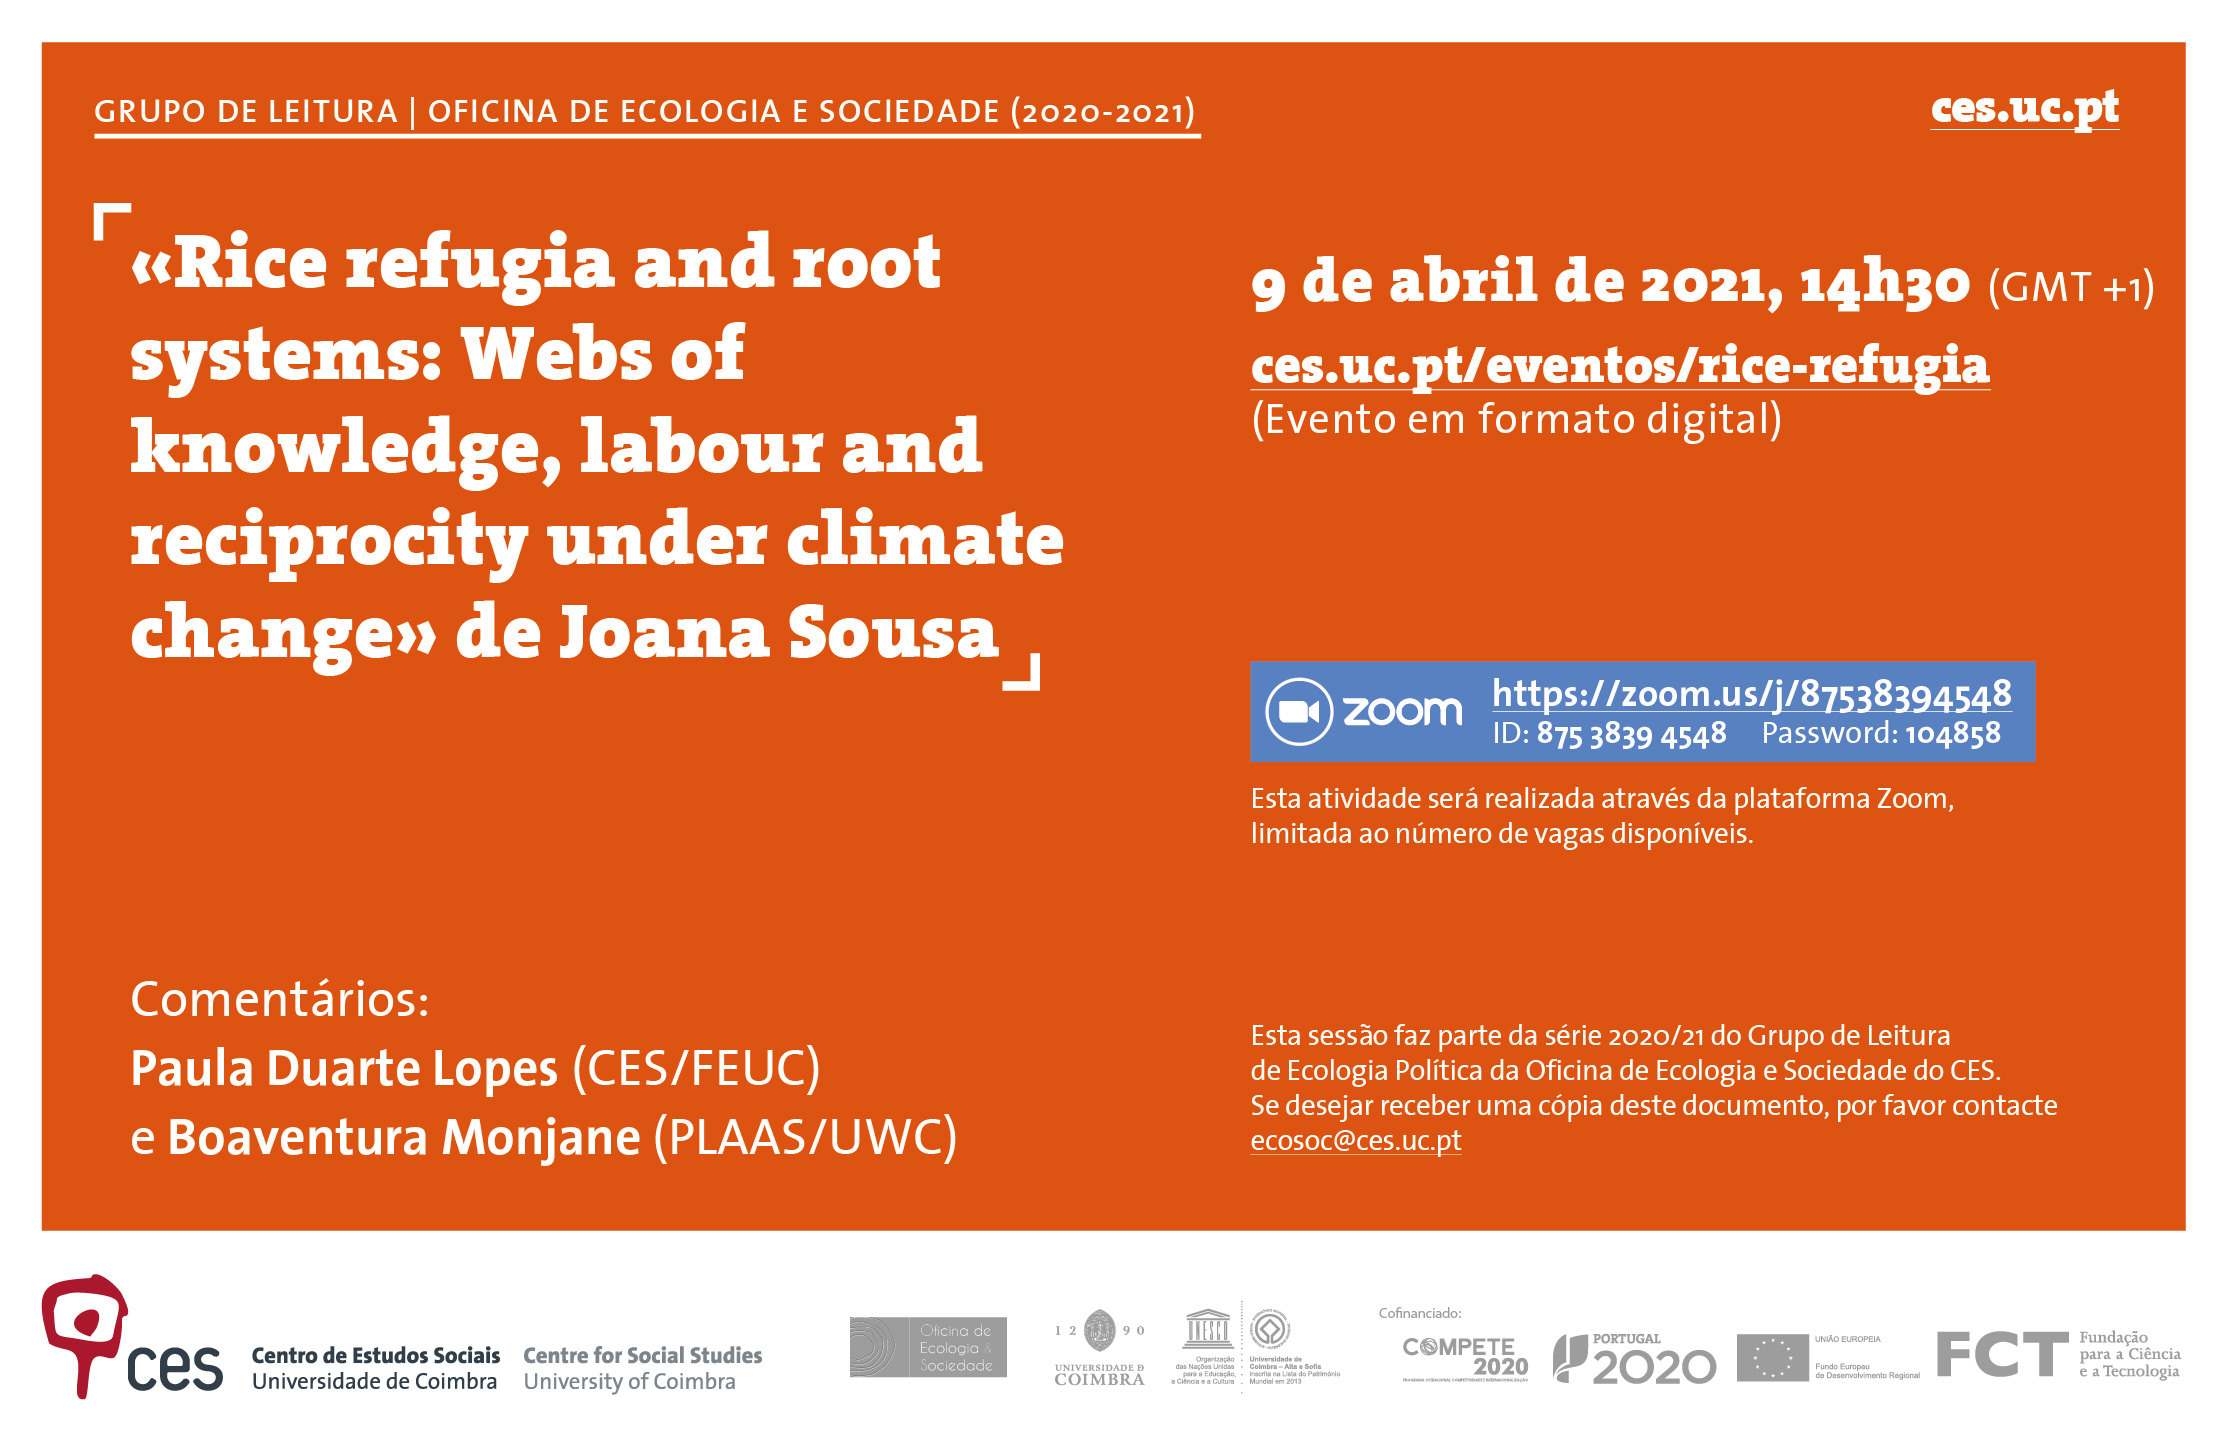 «Rice refugia and root systems: Webs of knowledge, labour and reciprocity under climate change» by Joana Sousa<span id="edit_31779"><script>$(function() { $('#edit_31779').load( "/myces/user/editobj.php?tipo=evento&id=31779" ); });</script></span>